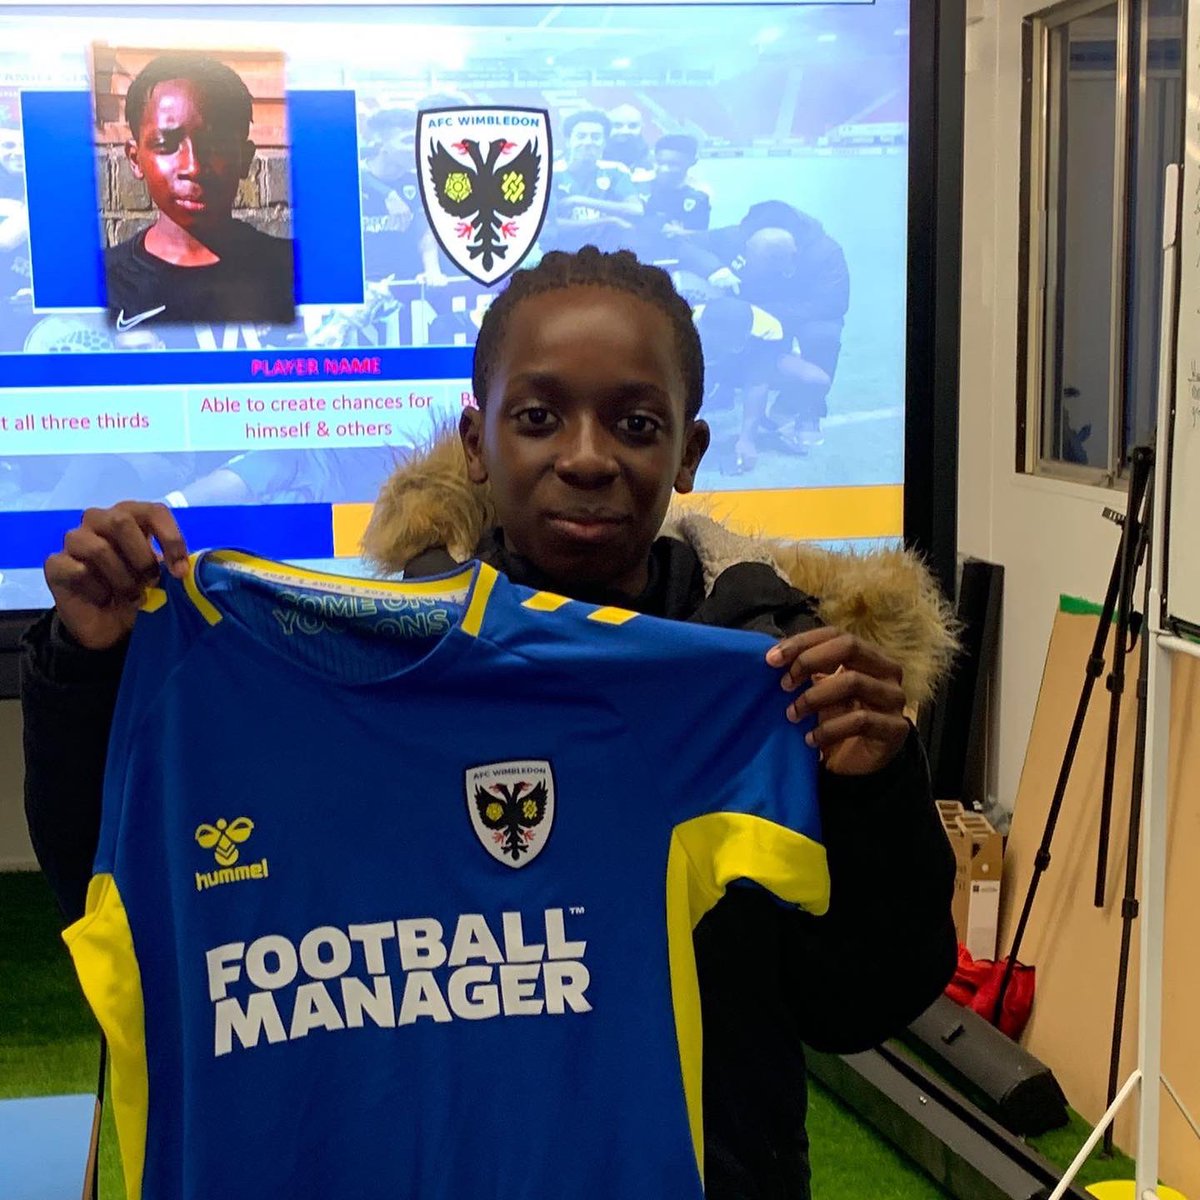 Congratulations to U13 Monèt who has officially signed for AFC Wimbledon ✍🏽 Proud day for him and his family, loved seeing your progression and development ever since joining us @Moonshot_FC 💛💙